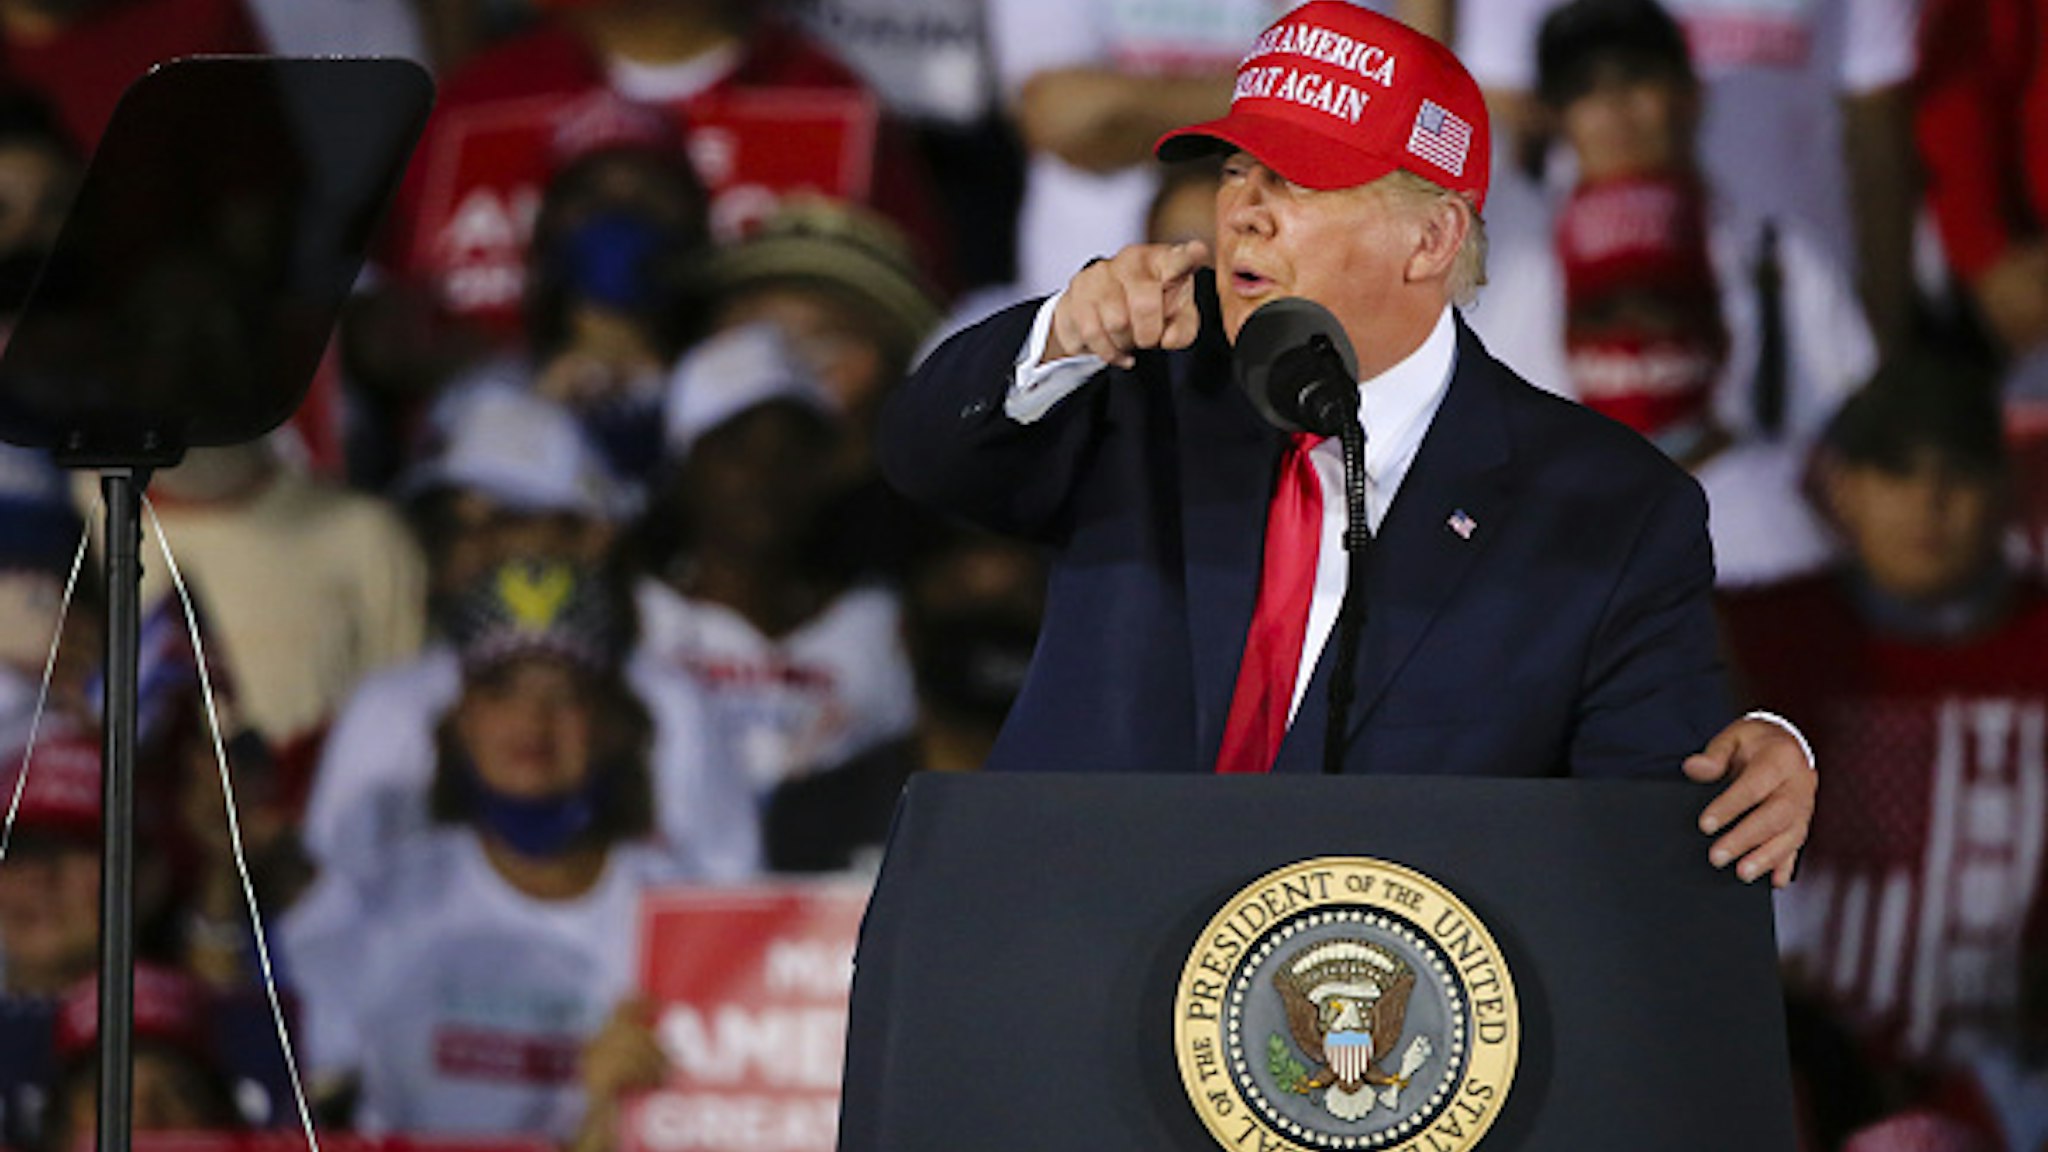 FLORIDA, USA - NOVEMBER 2: US President Donald Trump holds a rally to address his supporters at Miami-Opa Locka Executive Airport in Miami, Florida, United States on November 2, 2020.